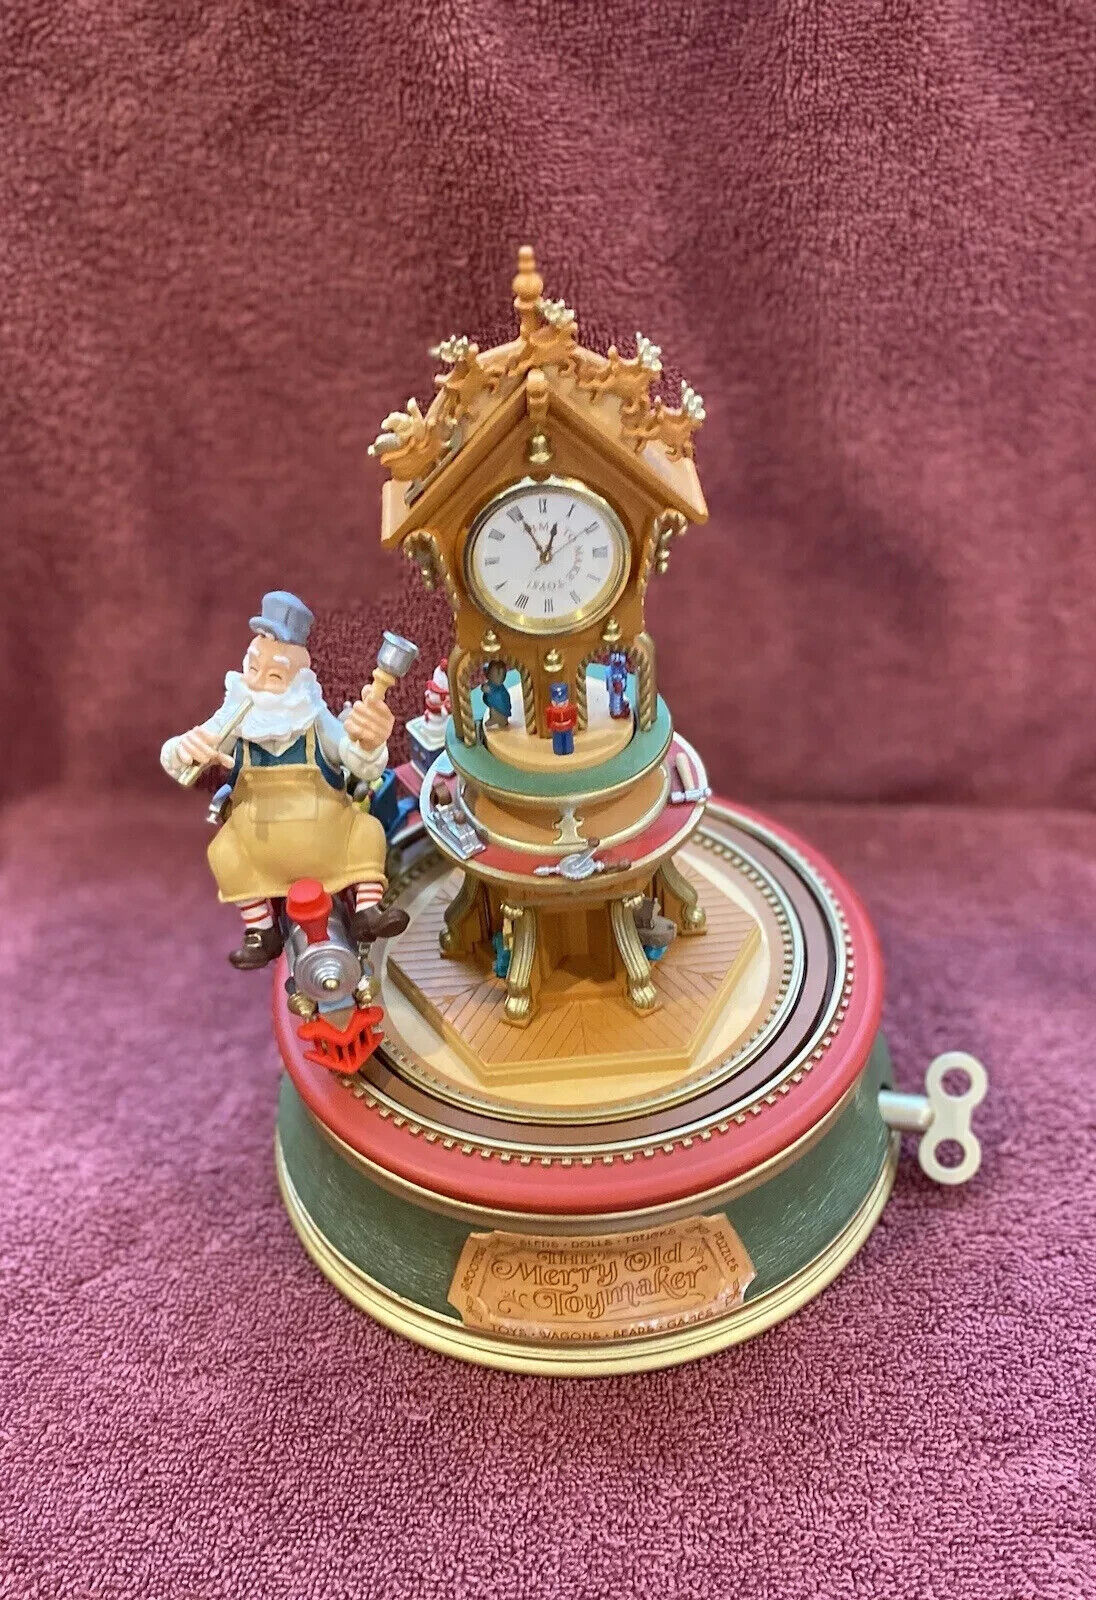 Pre Owned Hallmark The Merry Old Toymaker Table Top Musical Animated Santa Clock